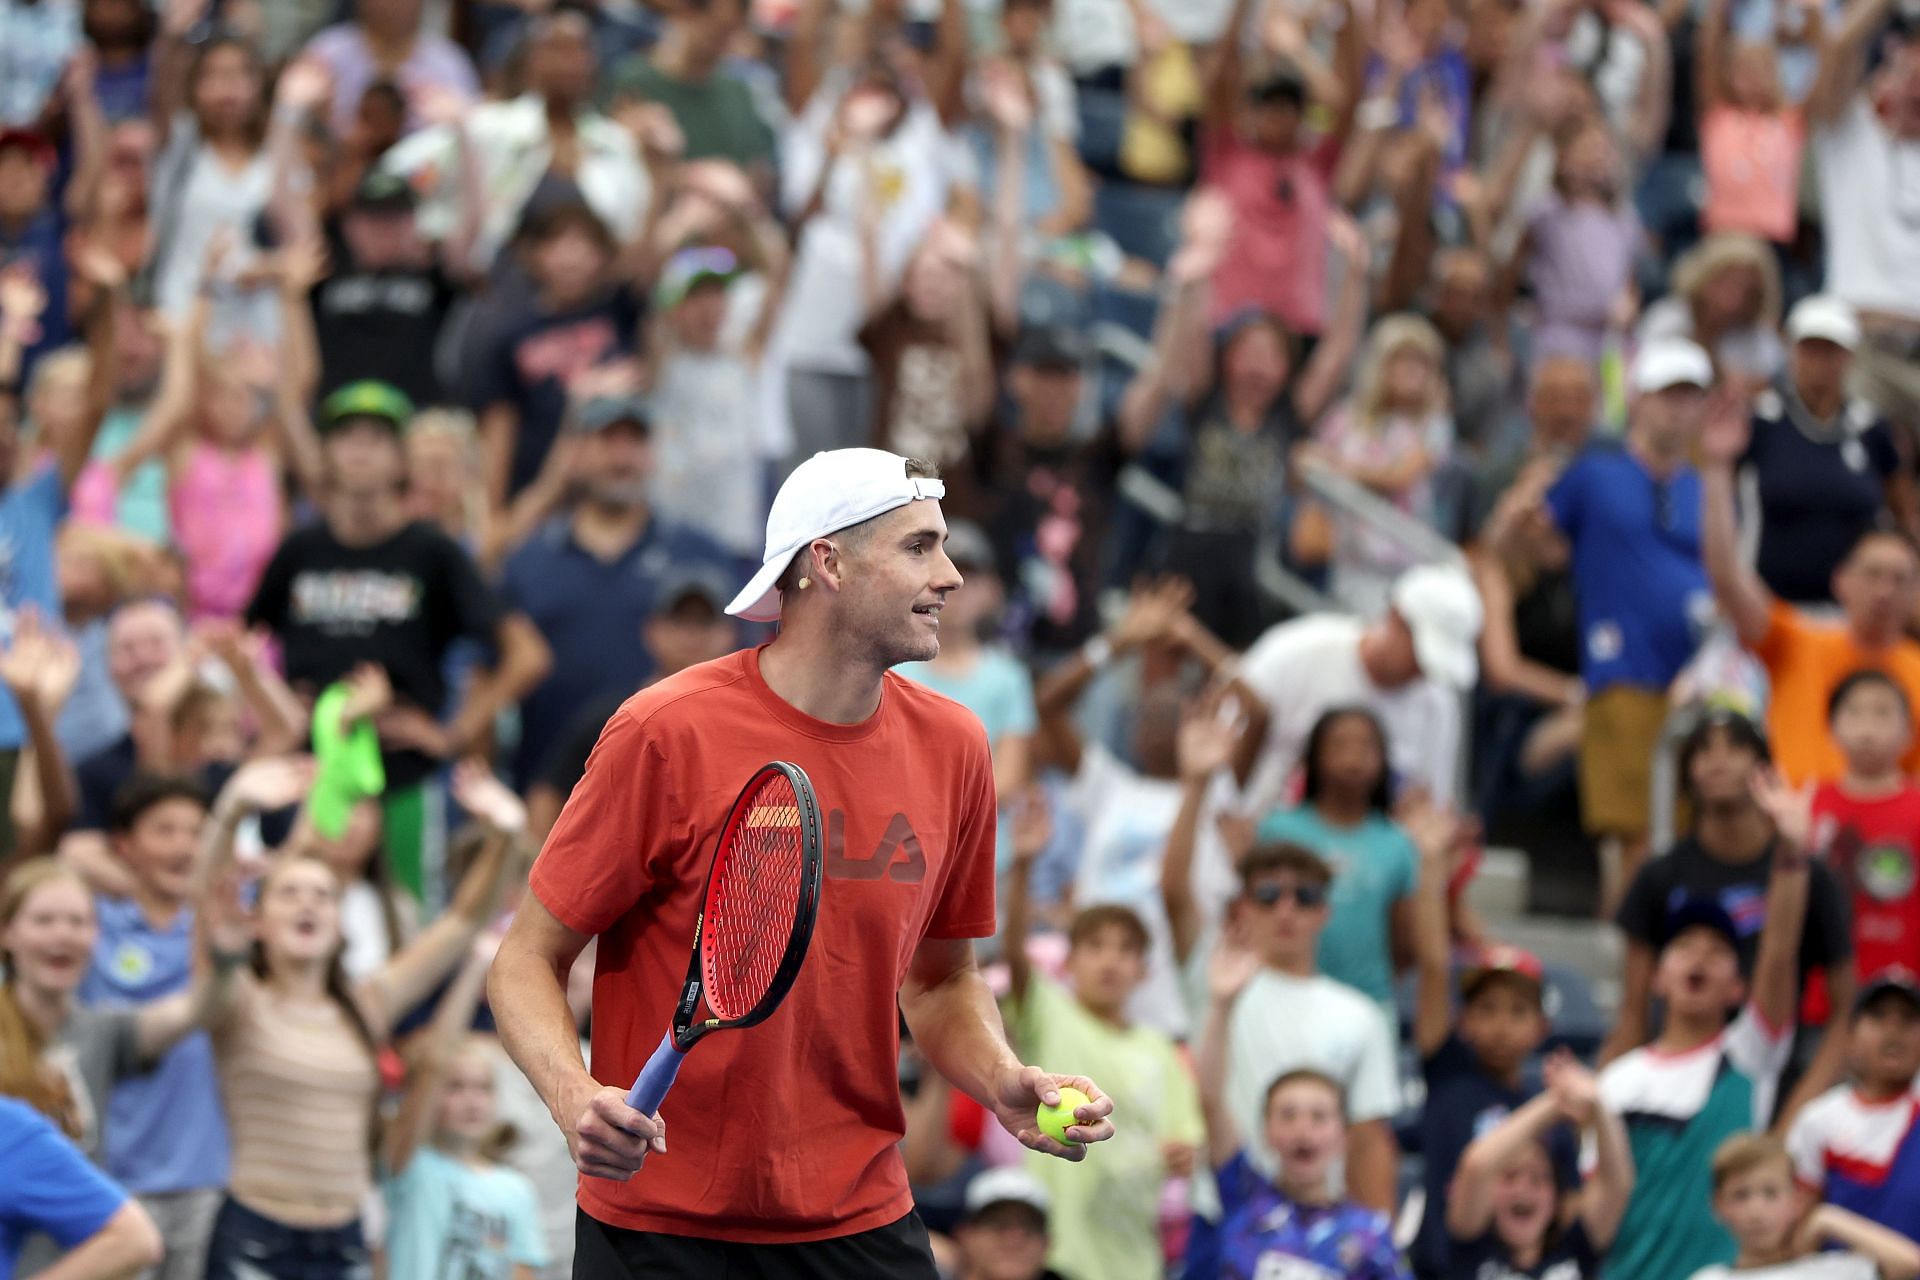 John Isner is aiming to win his first match of the year at the Dallas Open.